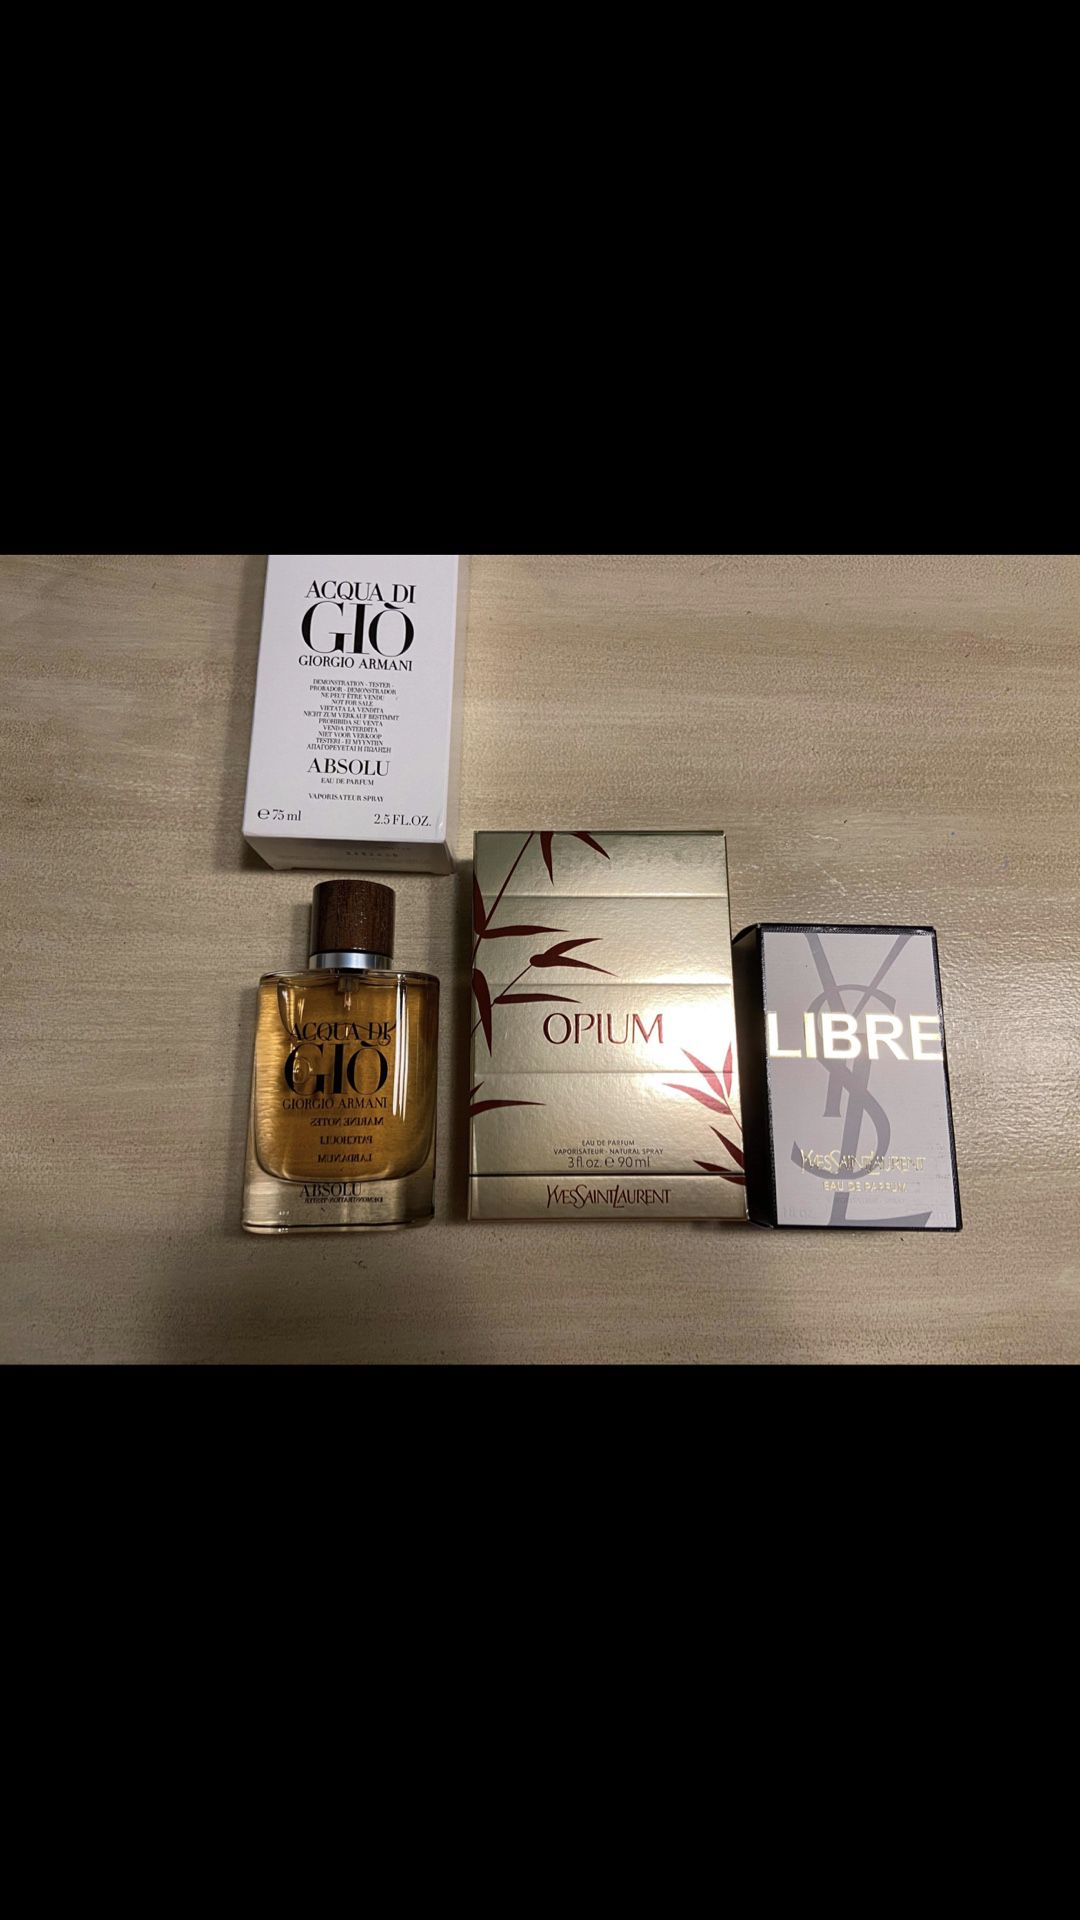 Authentic cologne and perfume